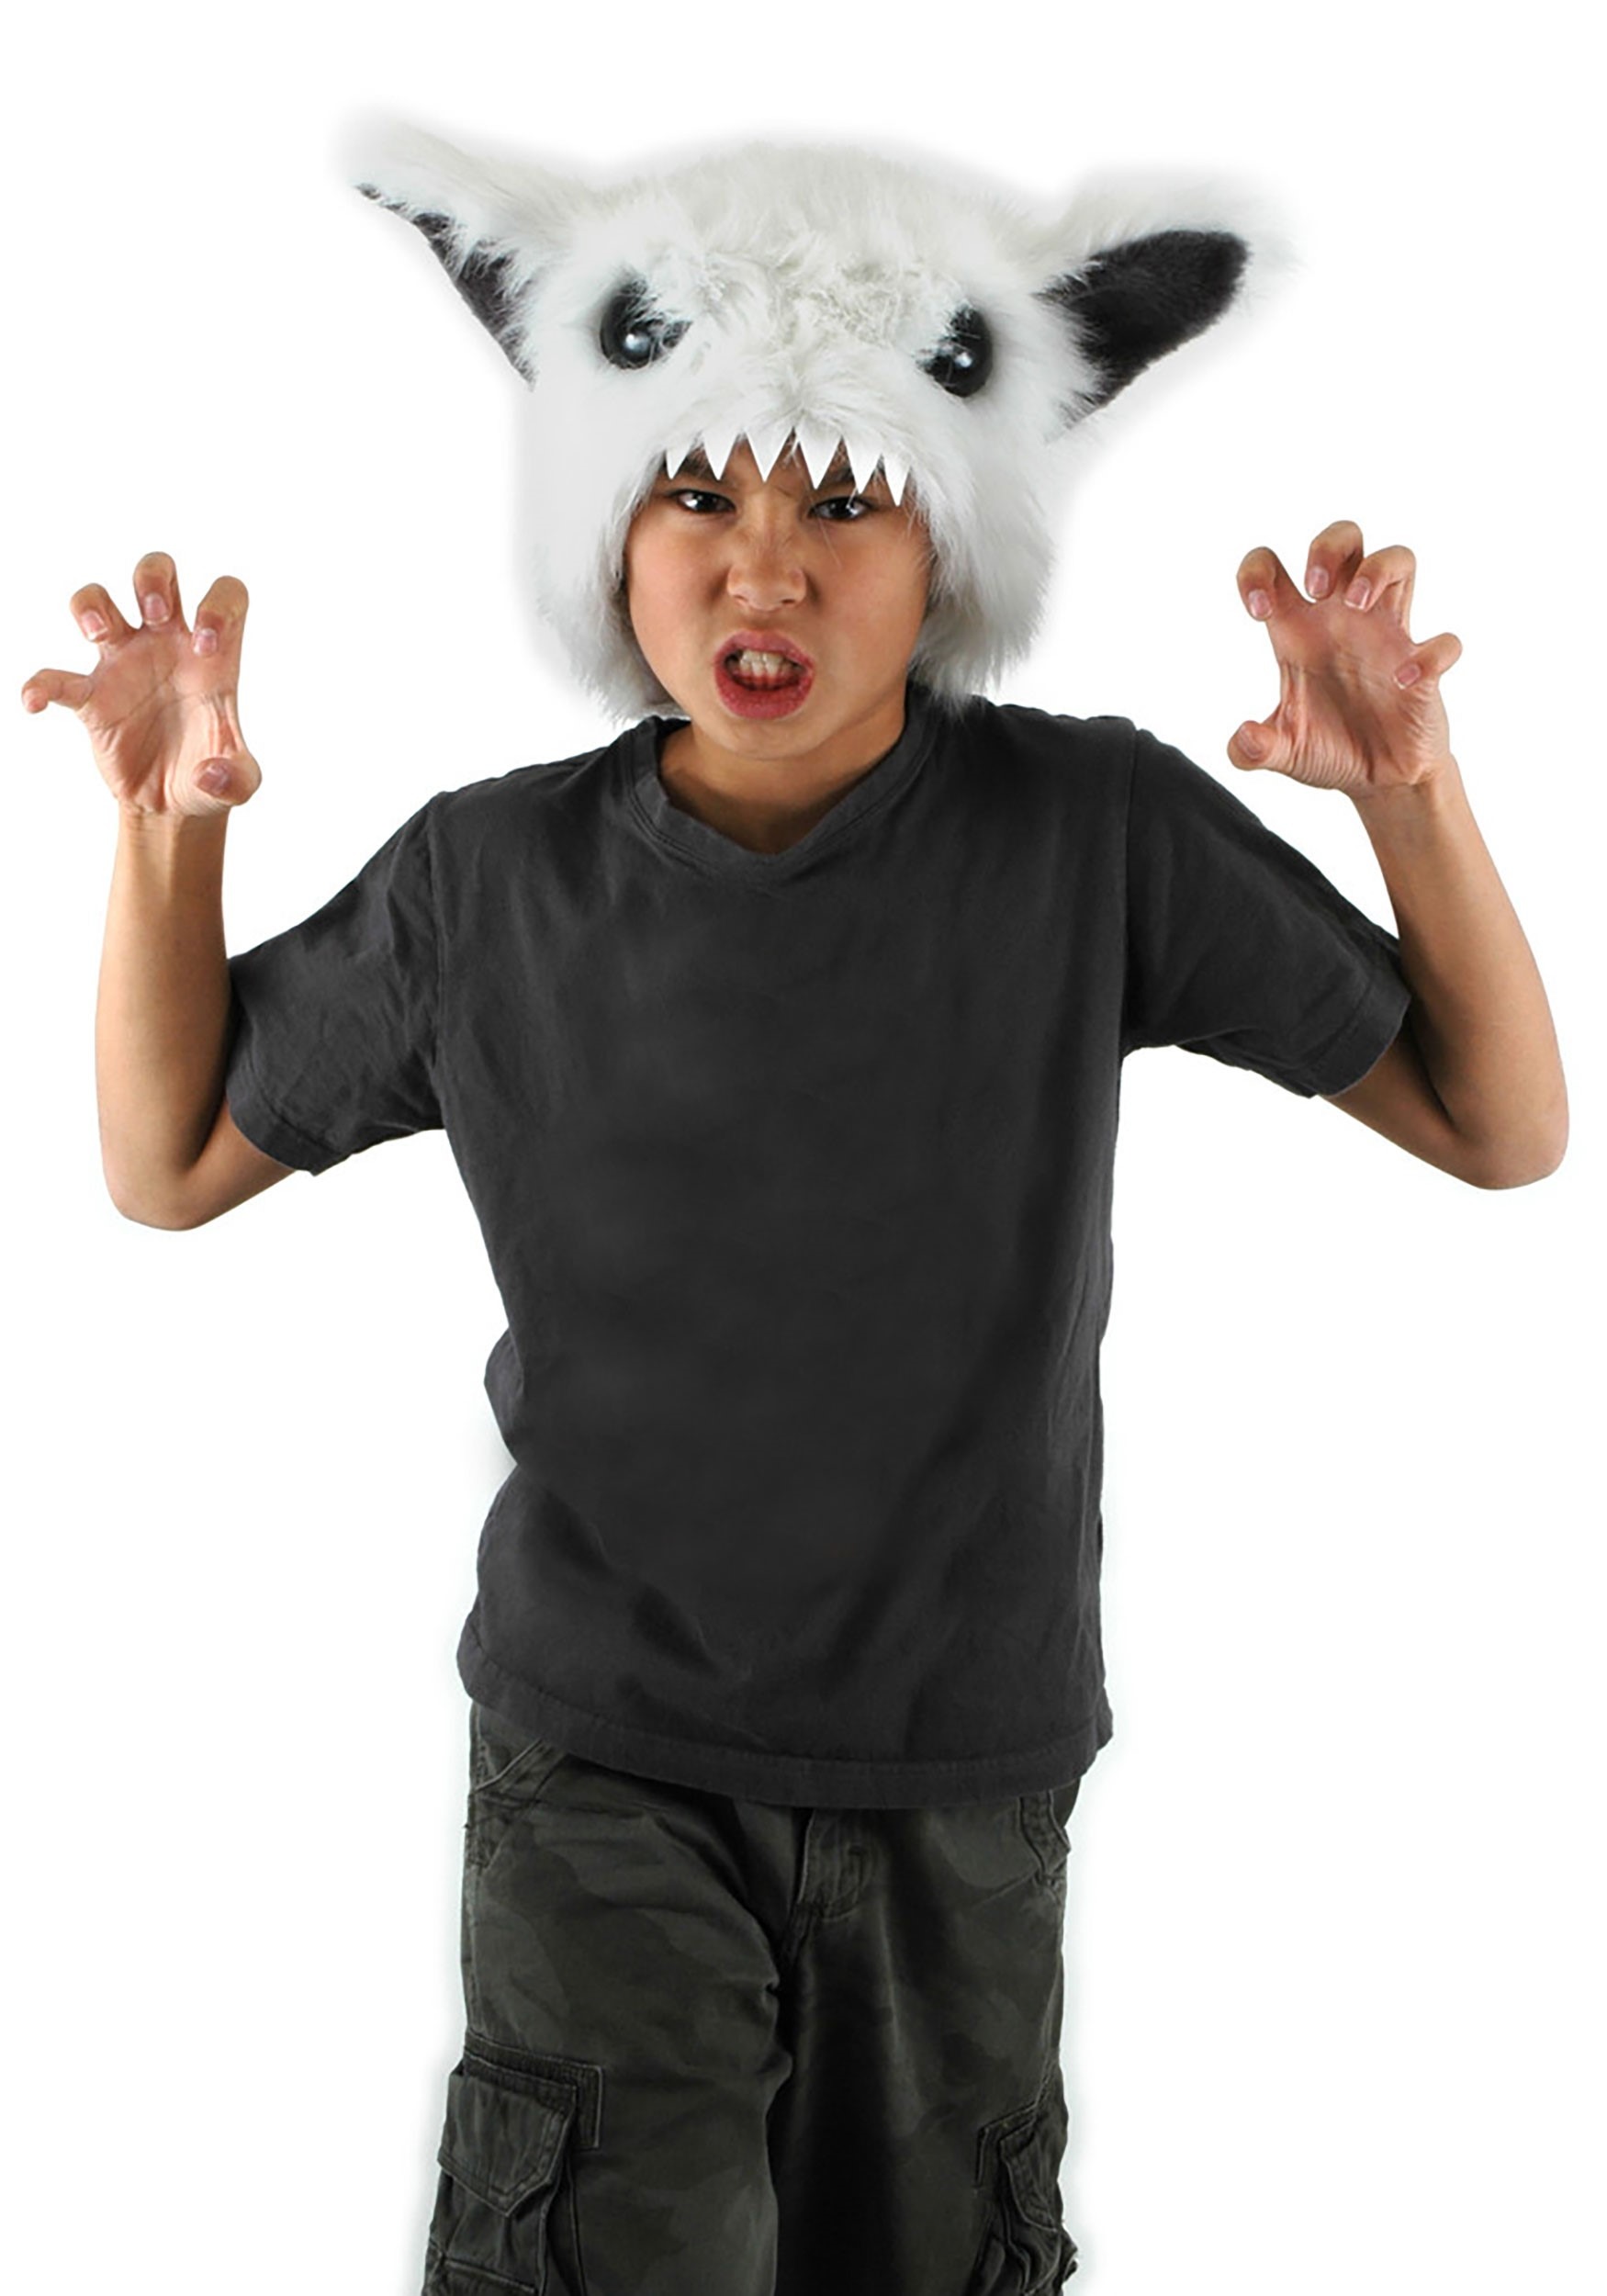 Baby Yeti costumethis is what I need for the kid! Lol  Halloween kids,  Monster costumes, Halloween costumes for kids